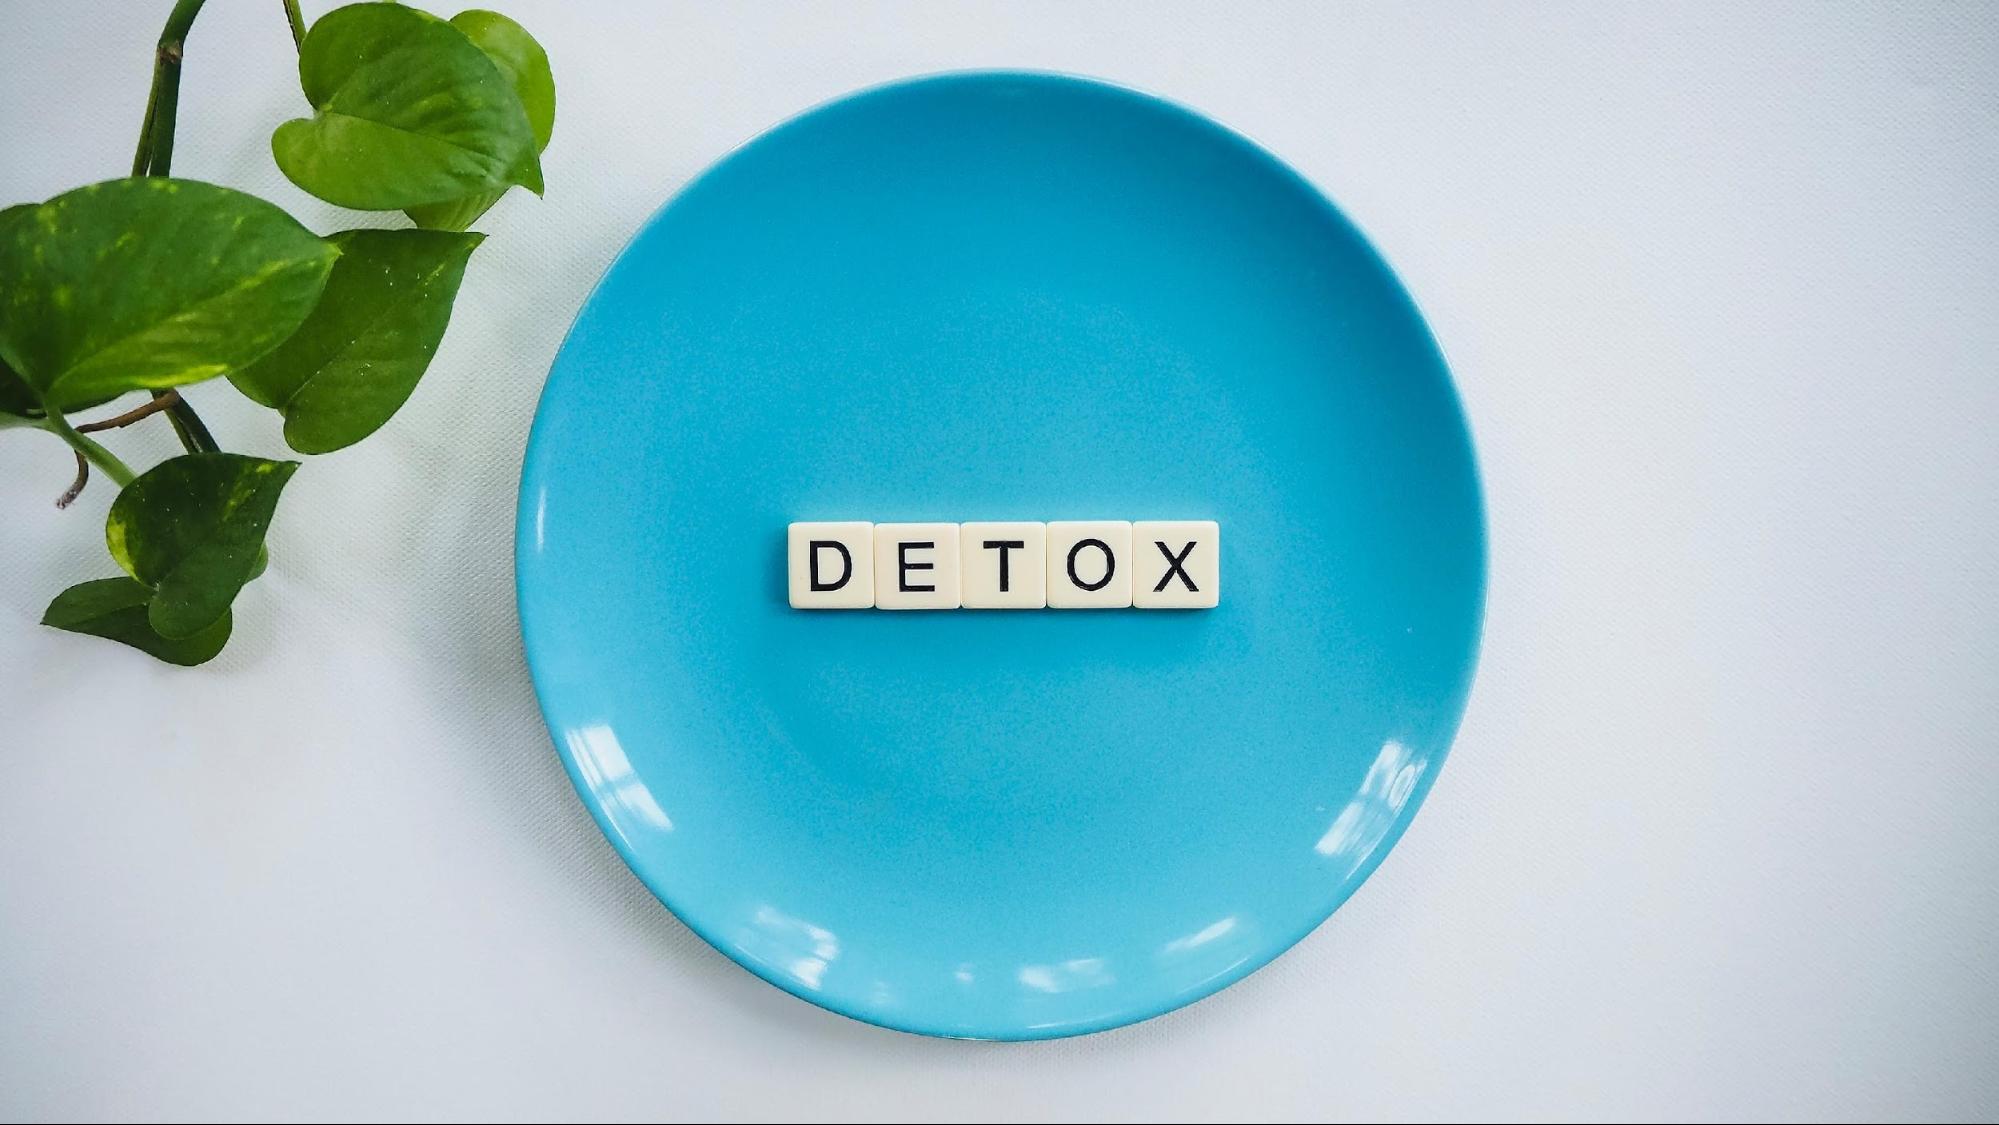 A blue plate with tiles spelling "detox" in the center icon